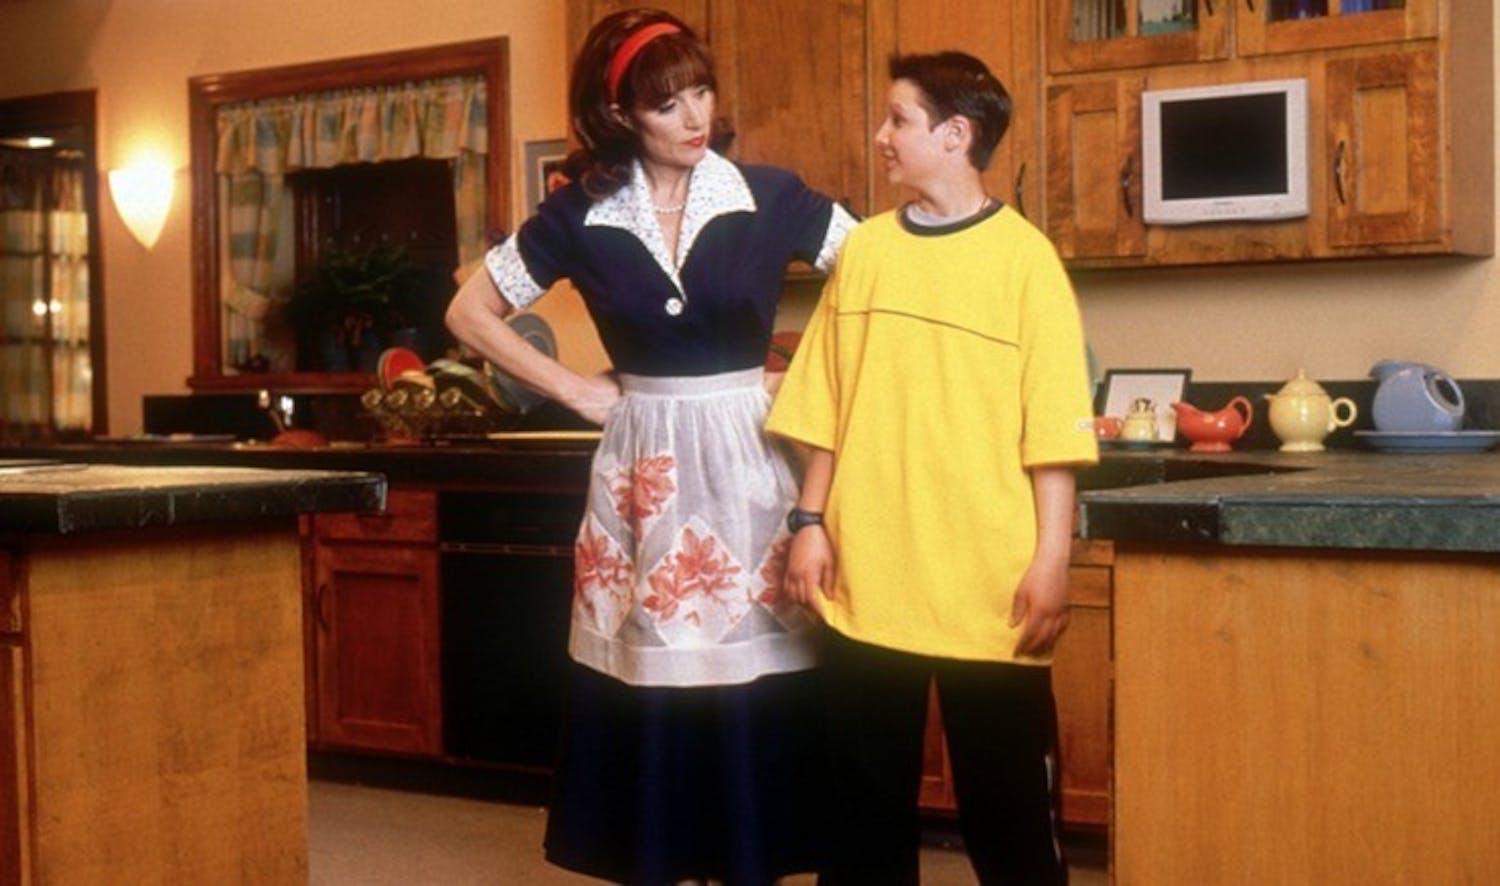 "Smart House" was kind of scary, but we'd be down for the technological upgrades. Photo taken from&nbsp;Bustle